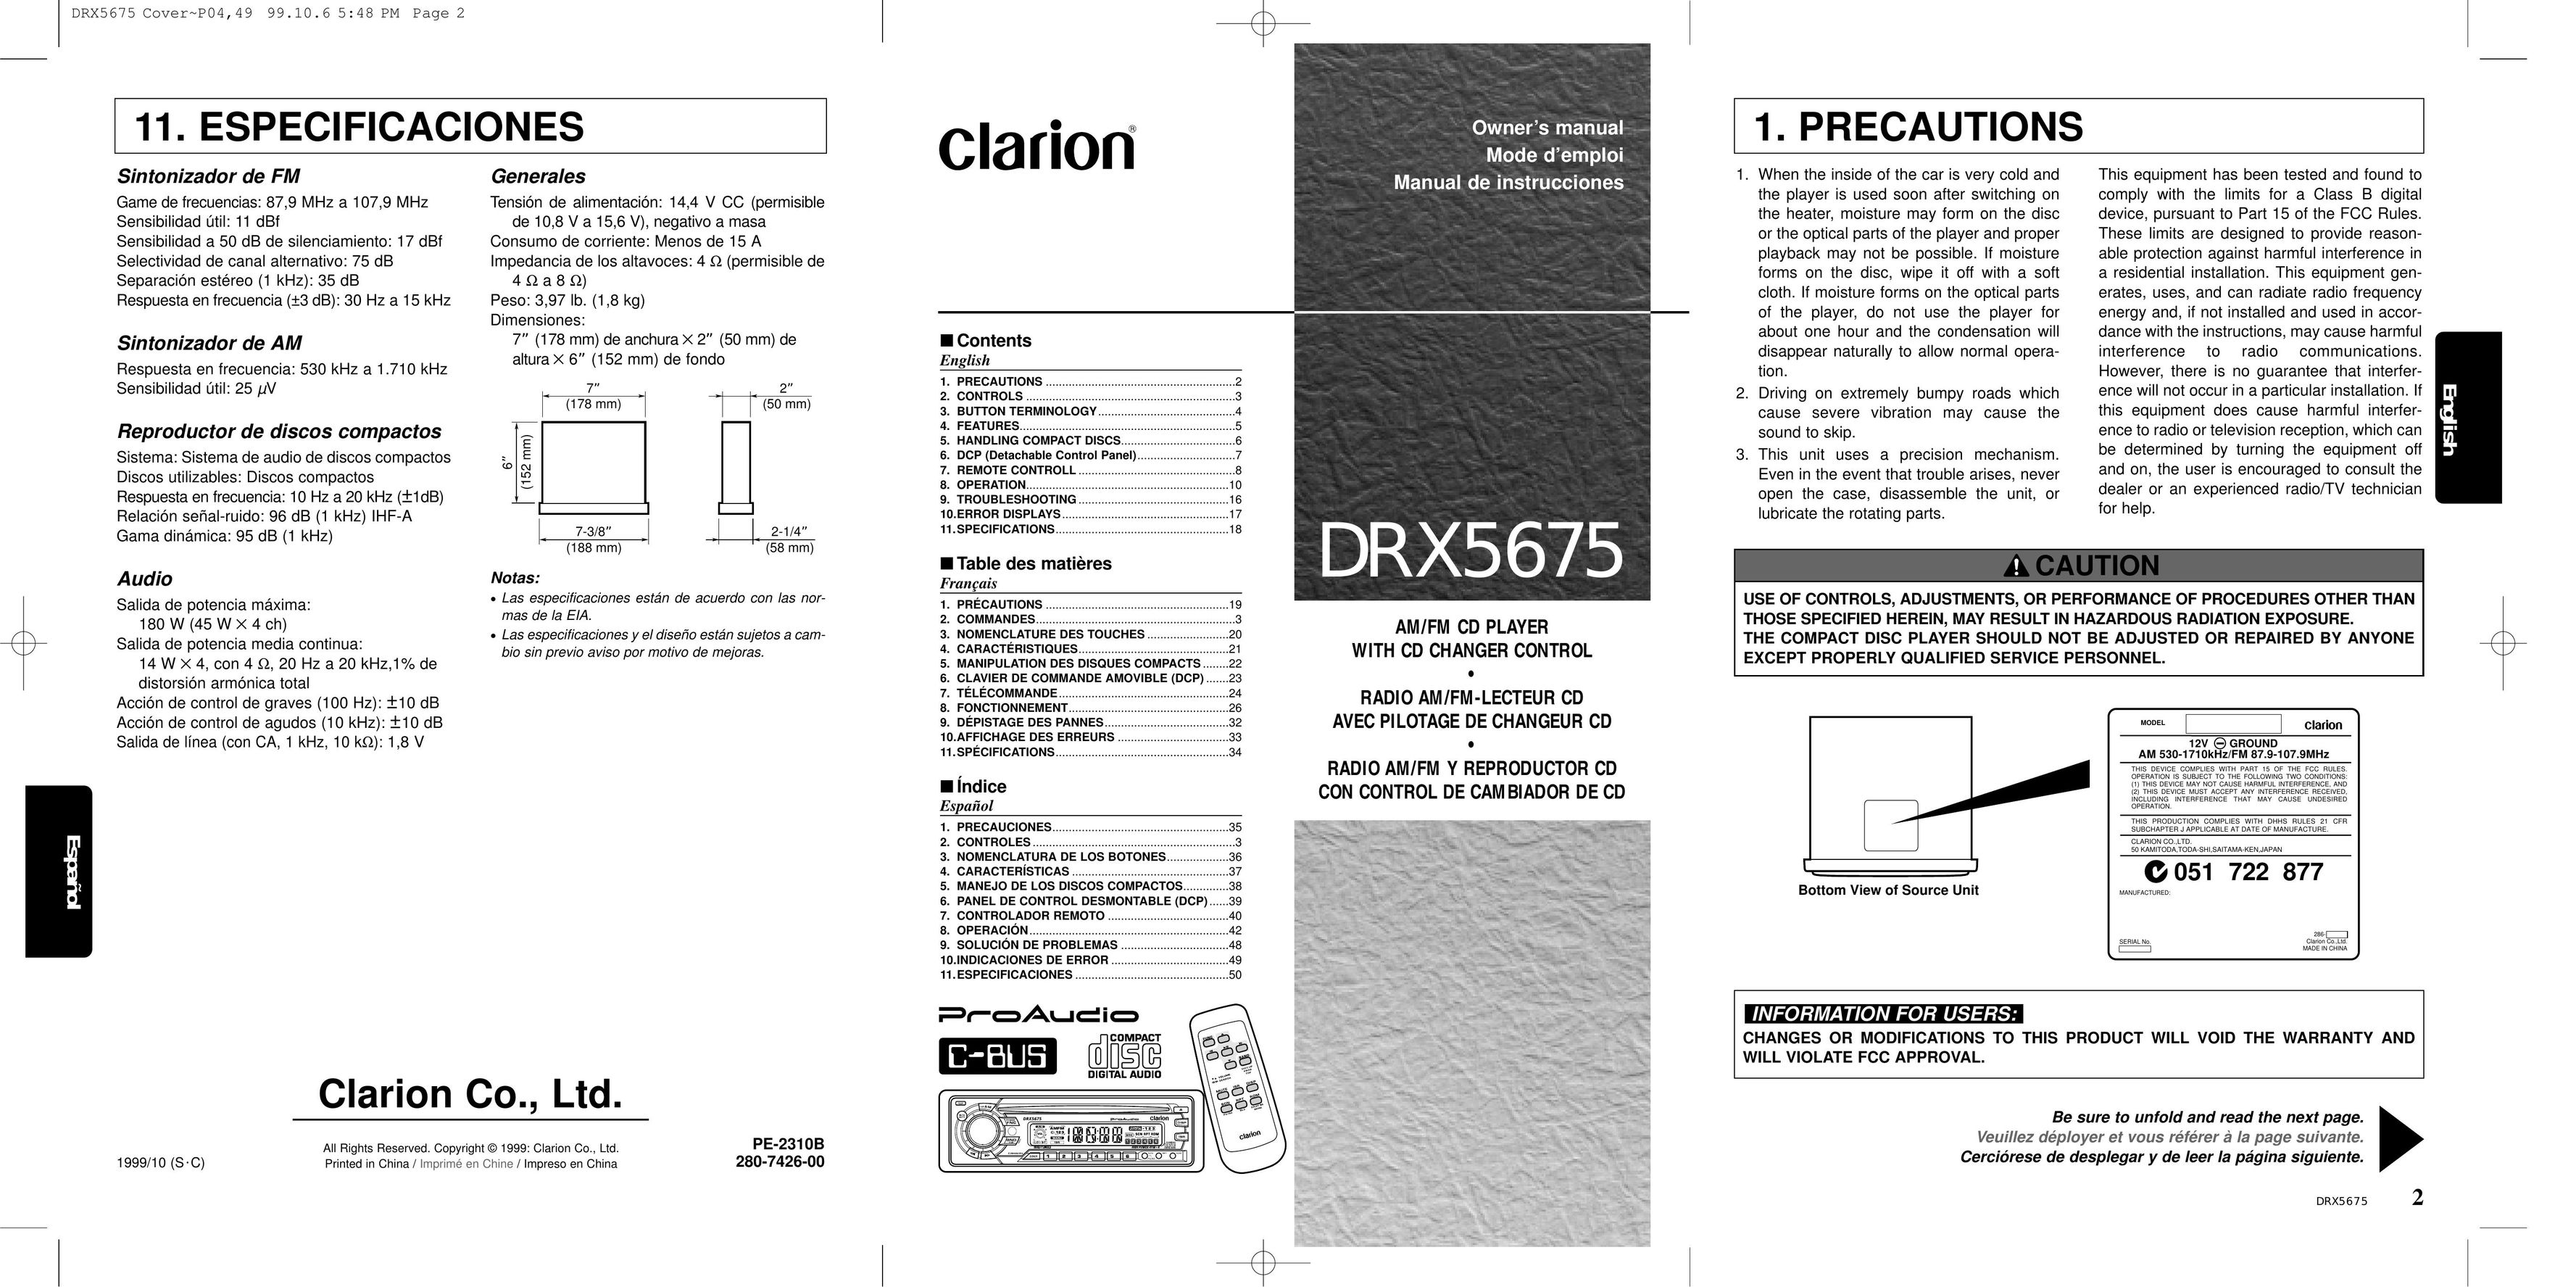 Clarion DRX5675 CD Player User Manual